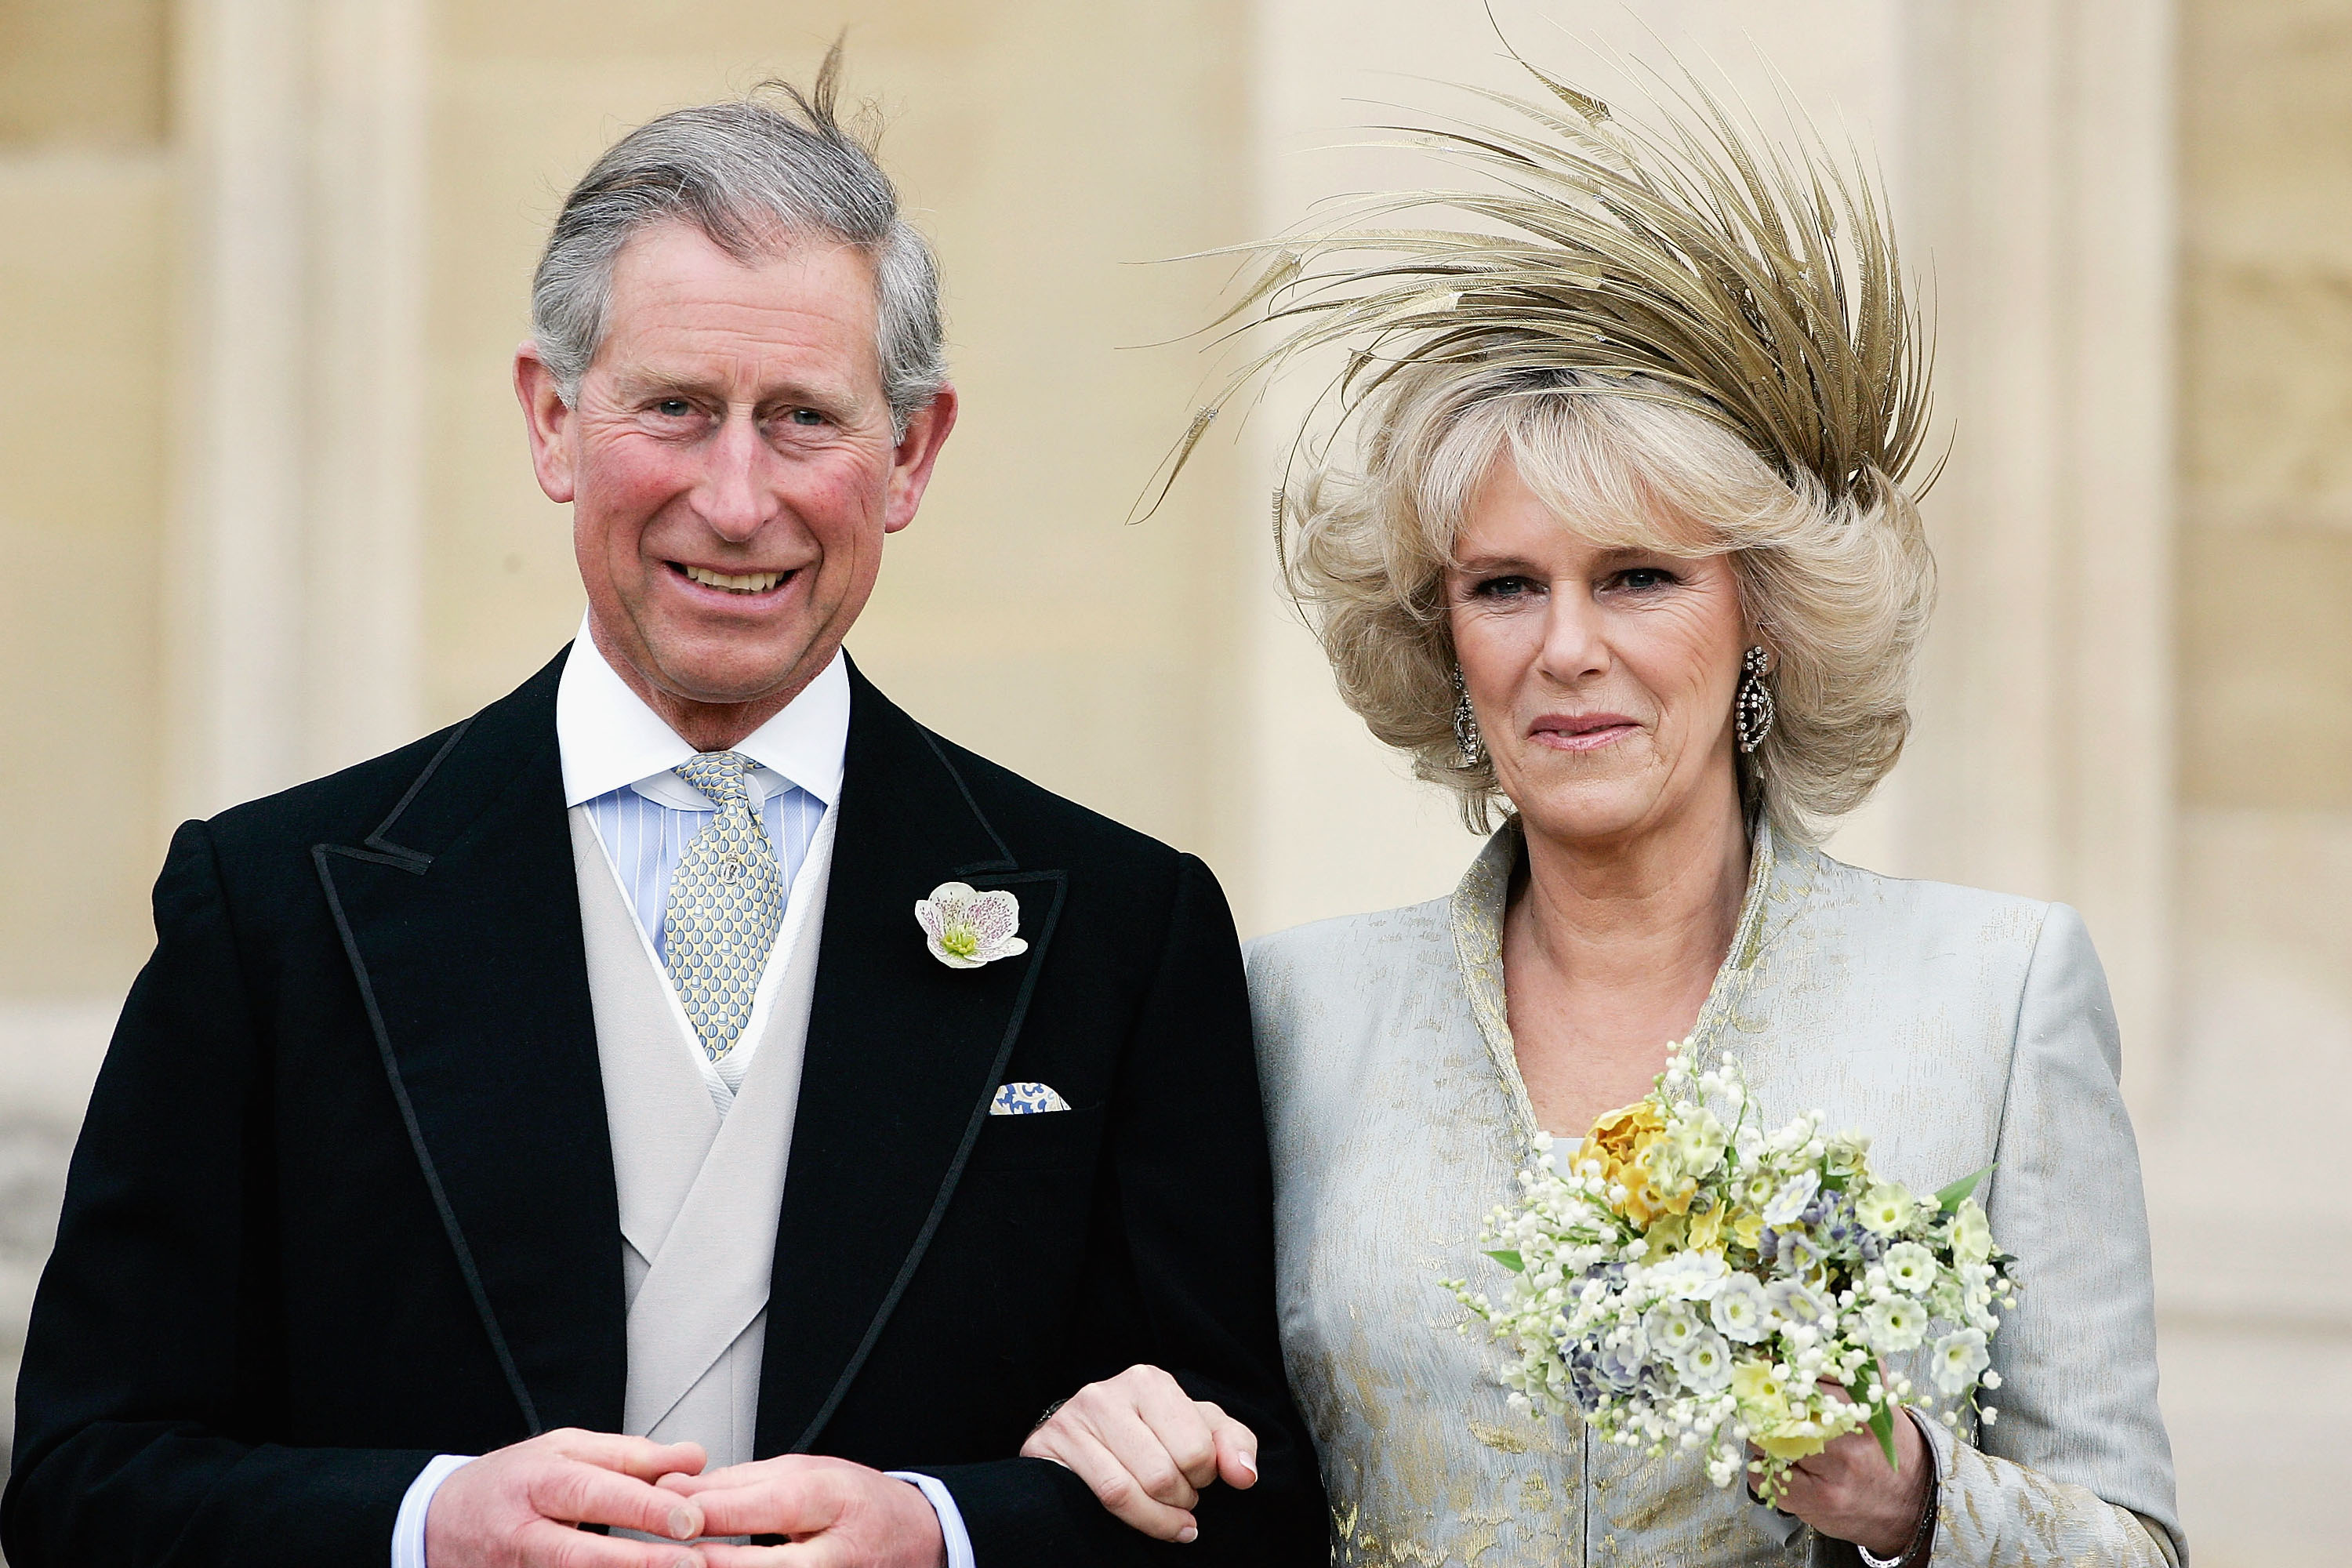 Prince Charles and Camilla Parker Bowles standing together with Camilla holding flowers